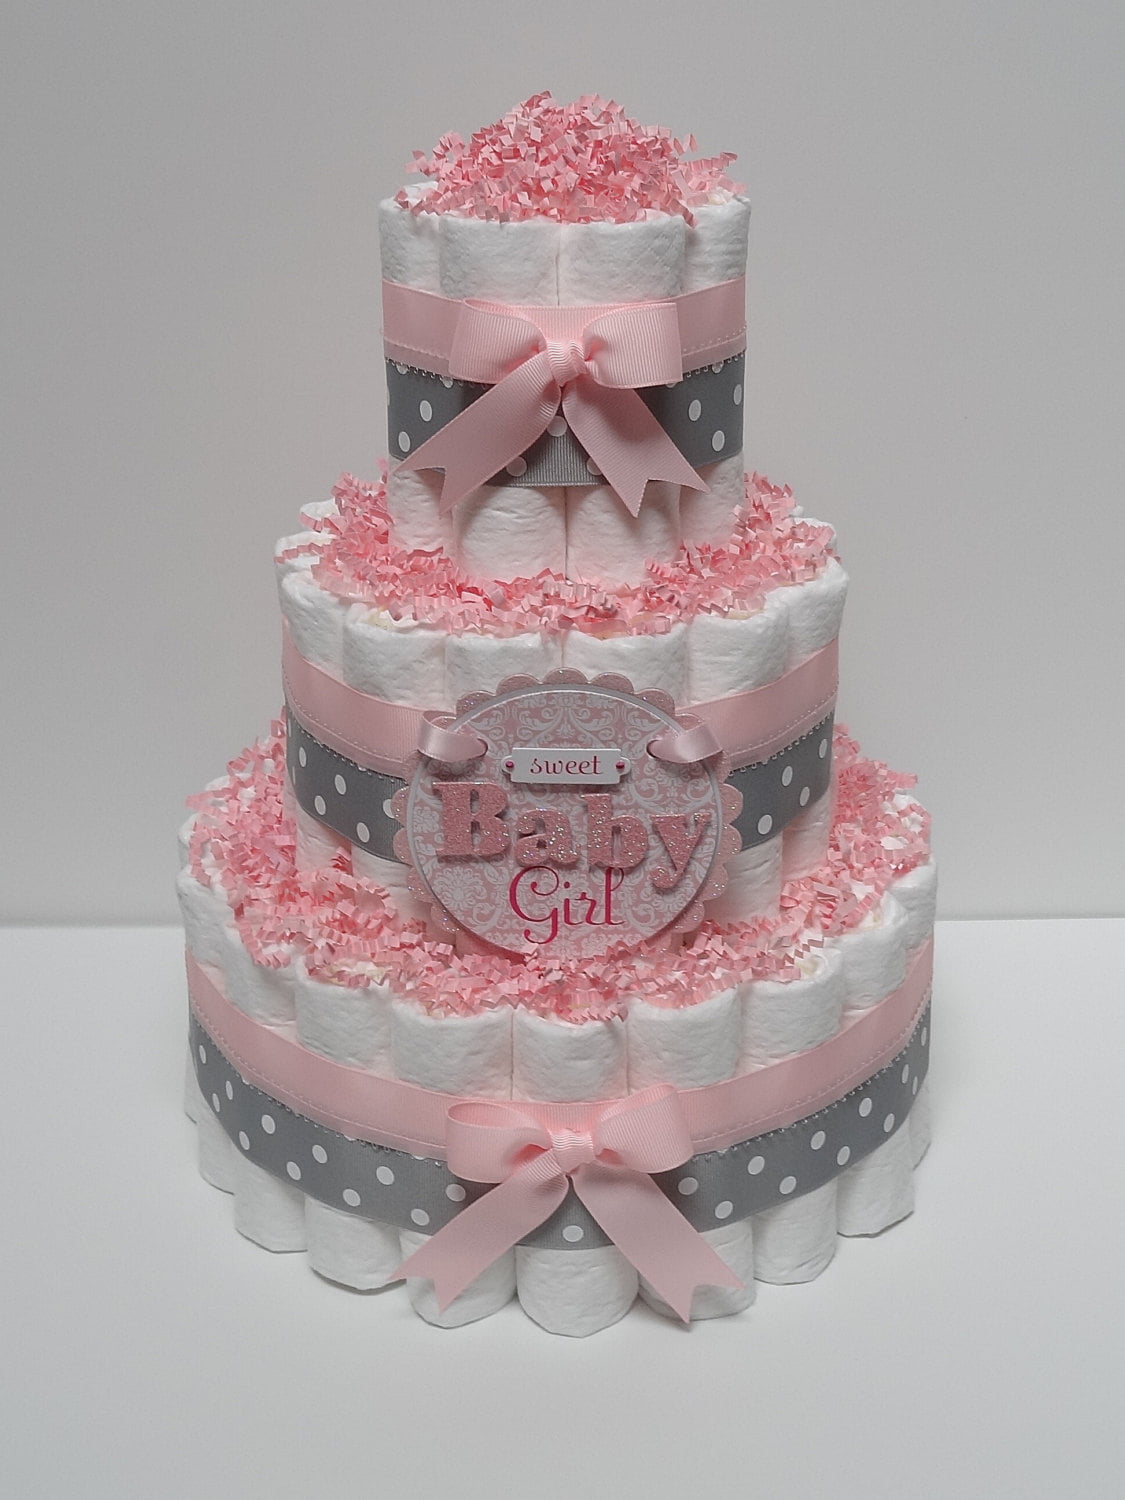 DIY Diaper Cakes For Baby Showers FREE Printable Baby